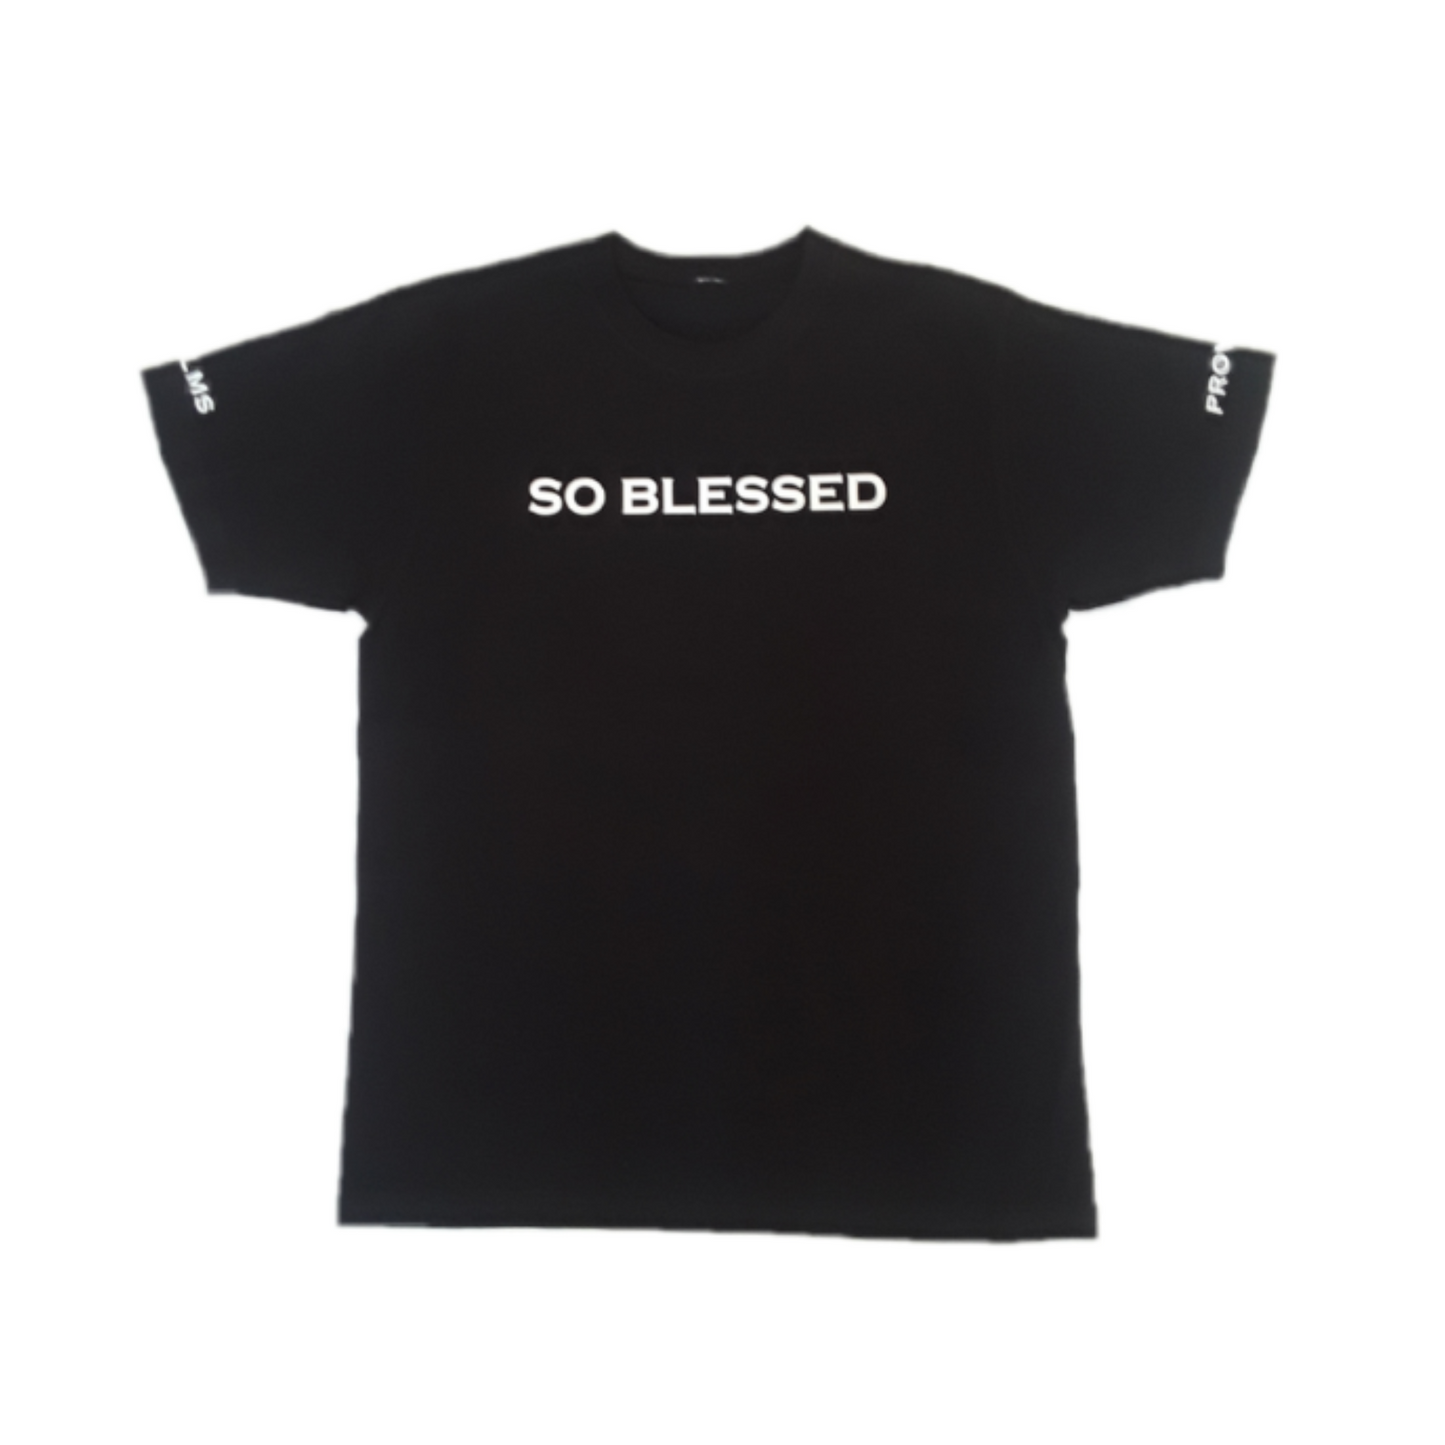 SO BLESSED T-shirt